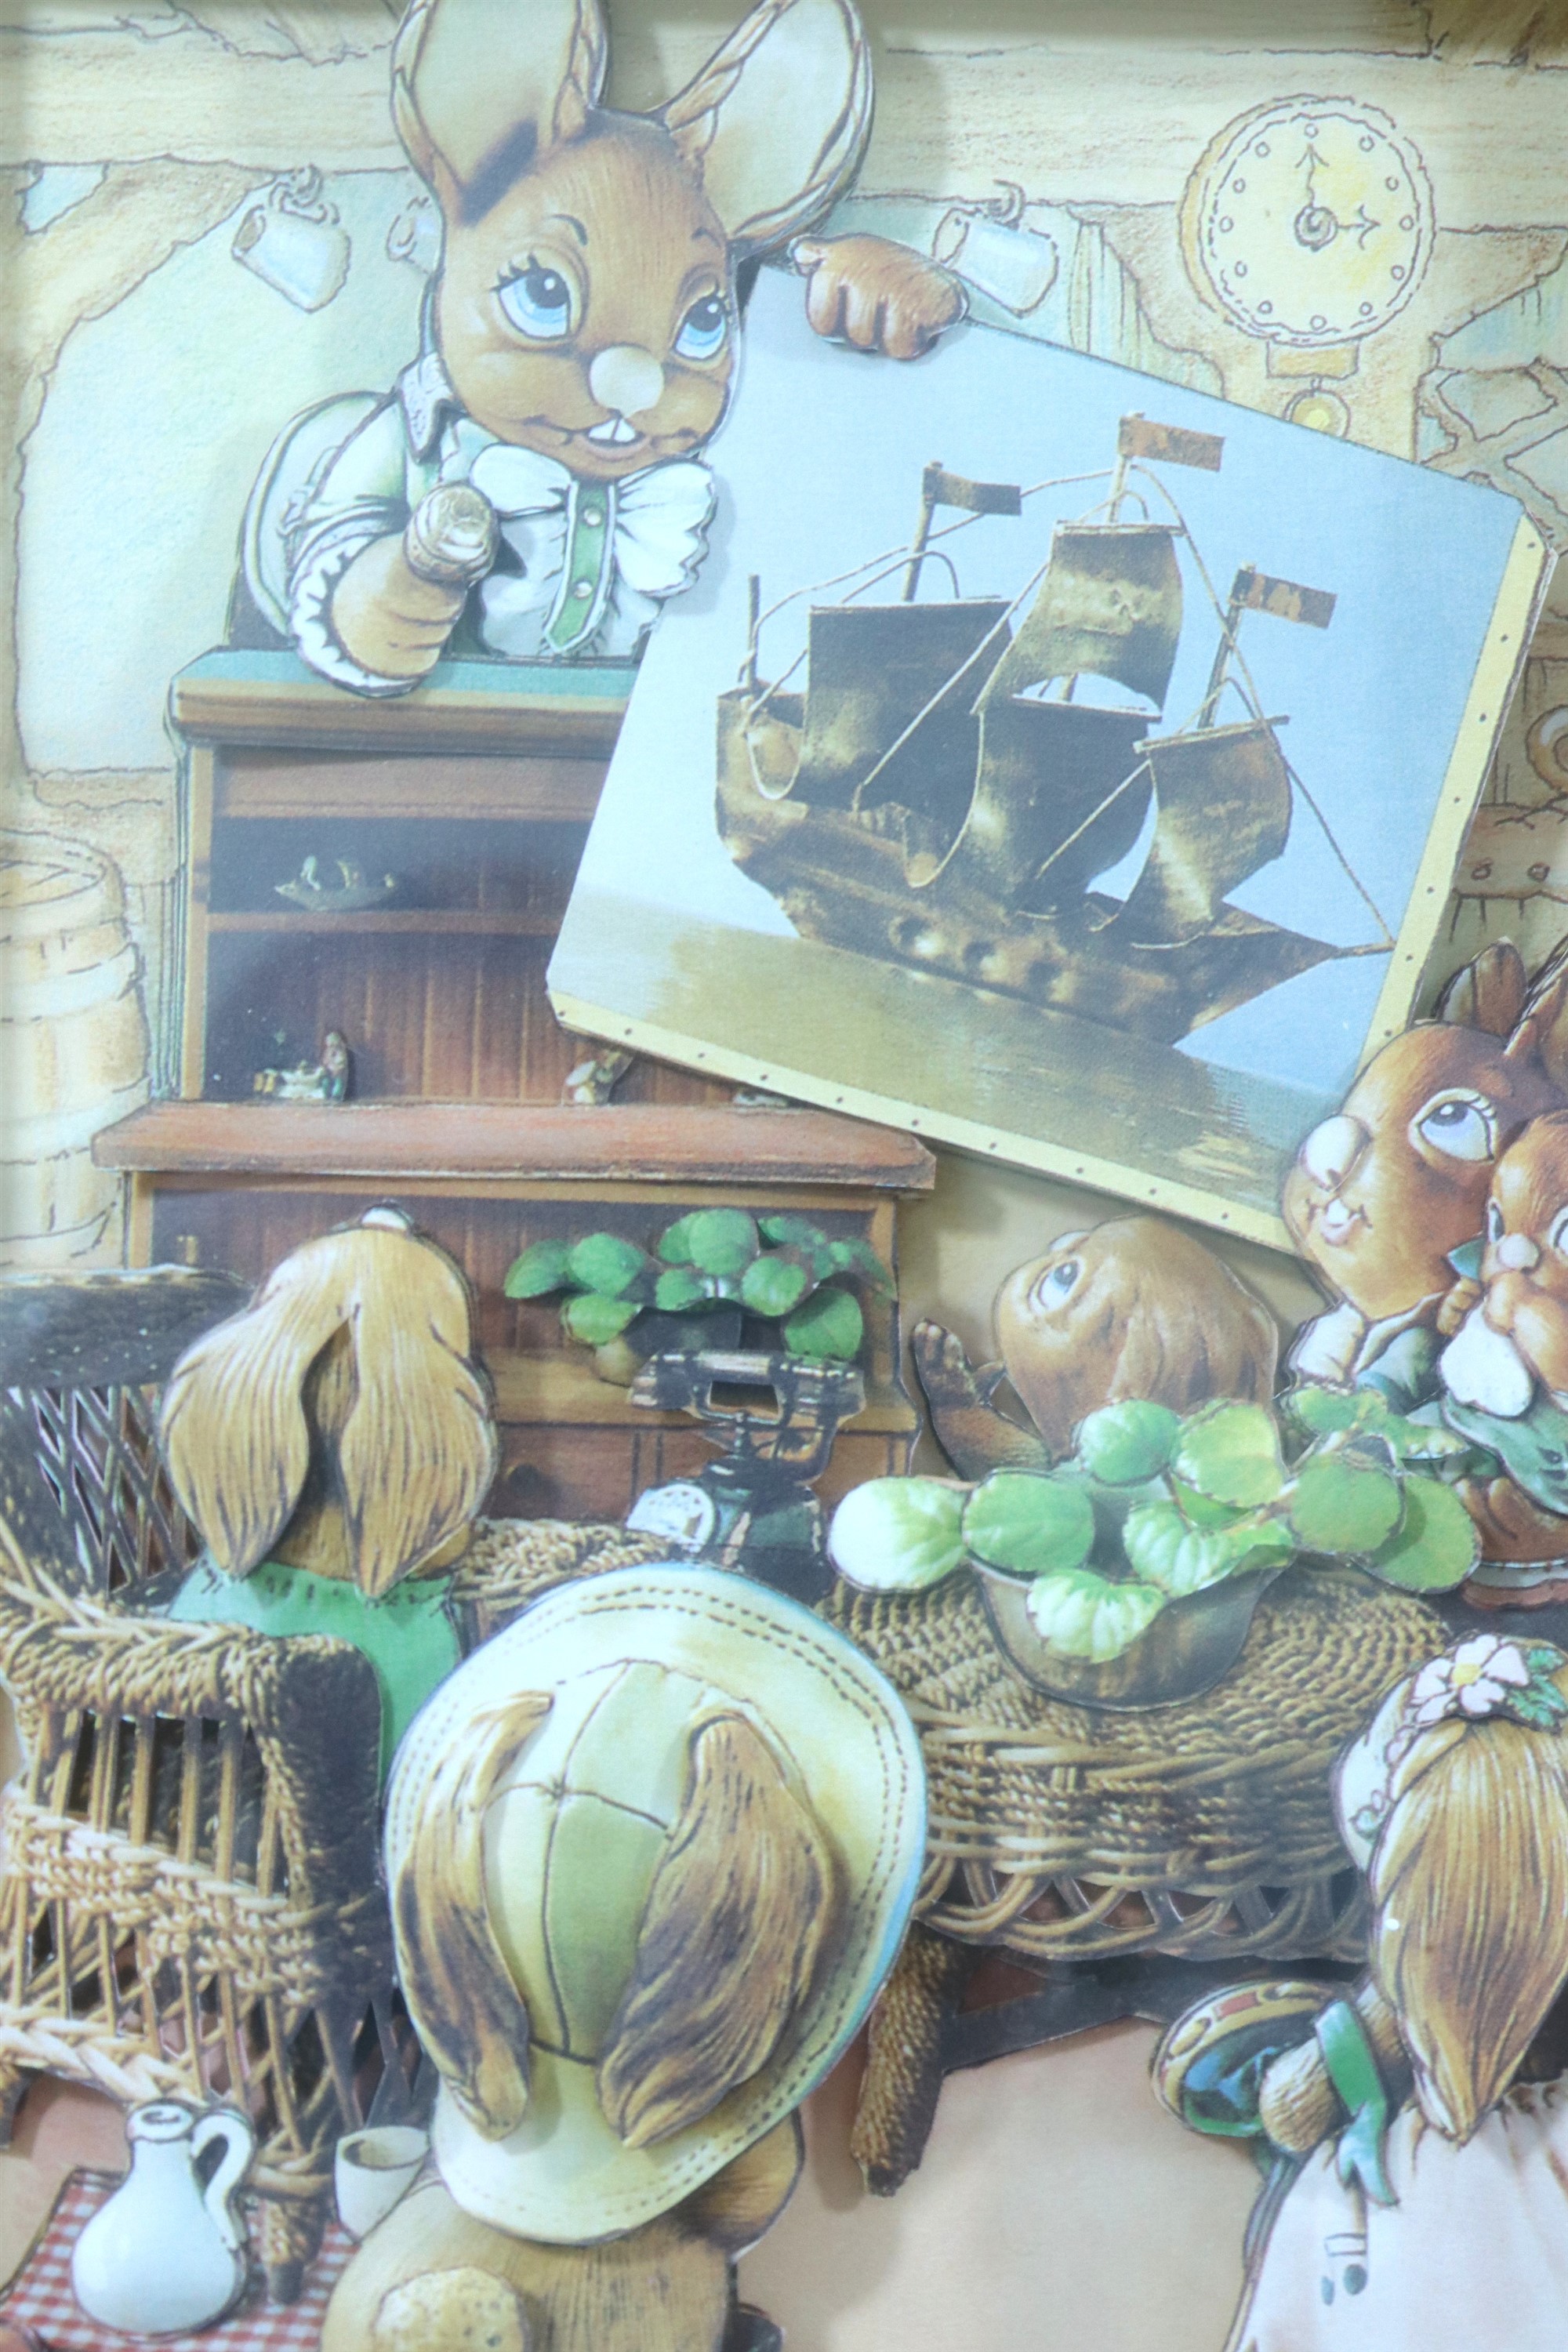 Three Pendelfin illustrations from "Village Tales", titled "The Famous Auction", "The Workshop of